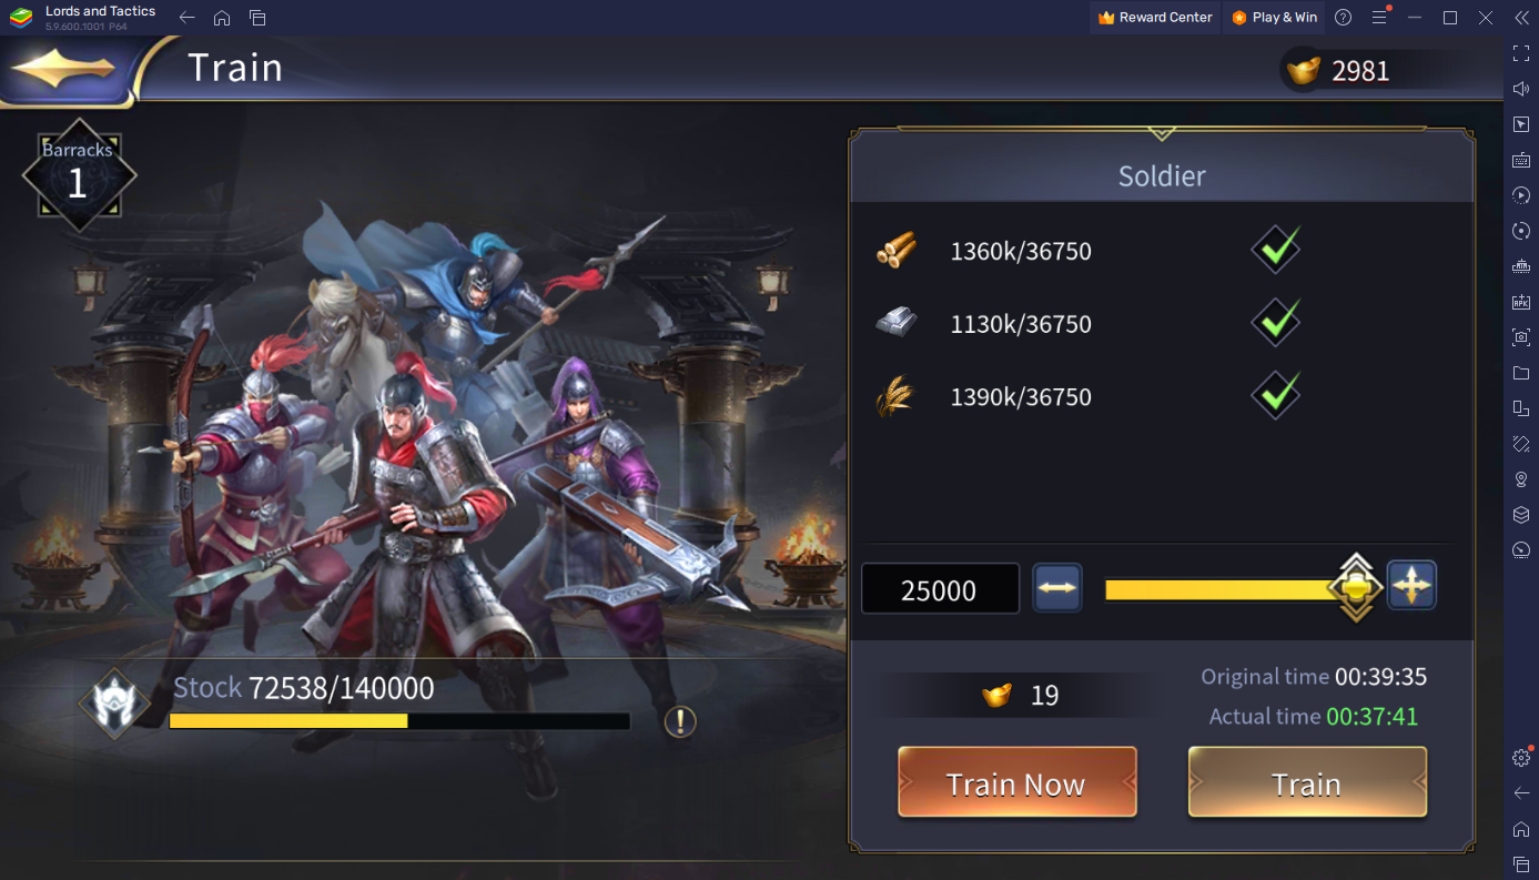 BlueStacks' Beginners Guide to Play Lords and Tactics